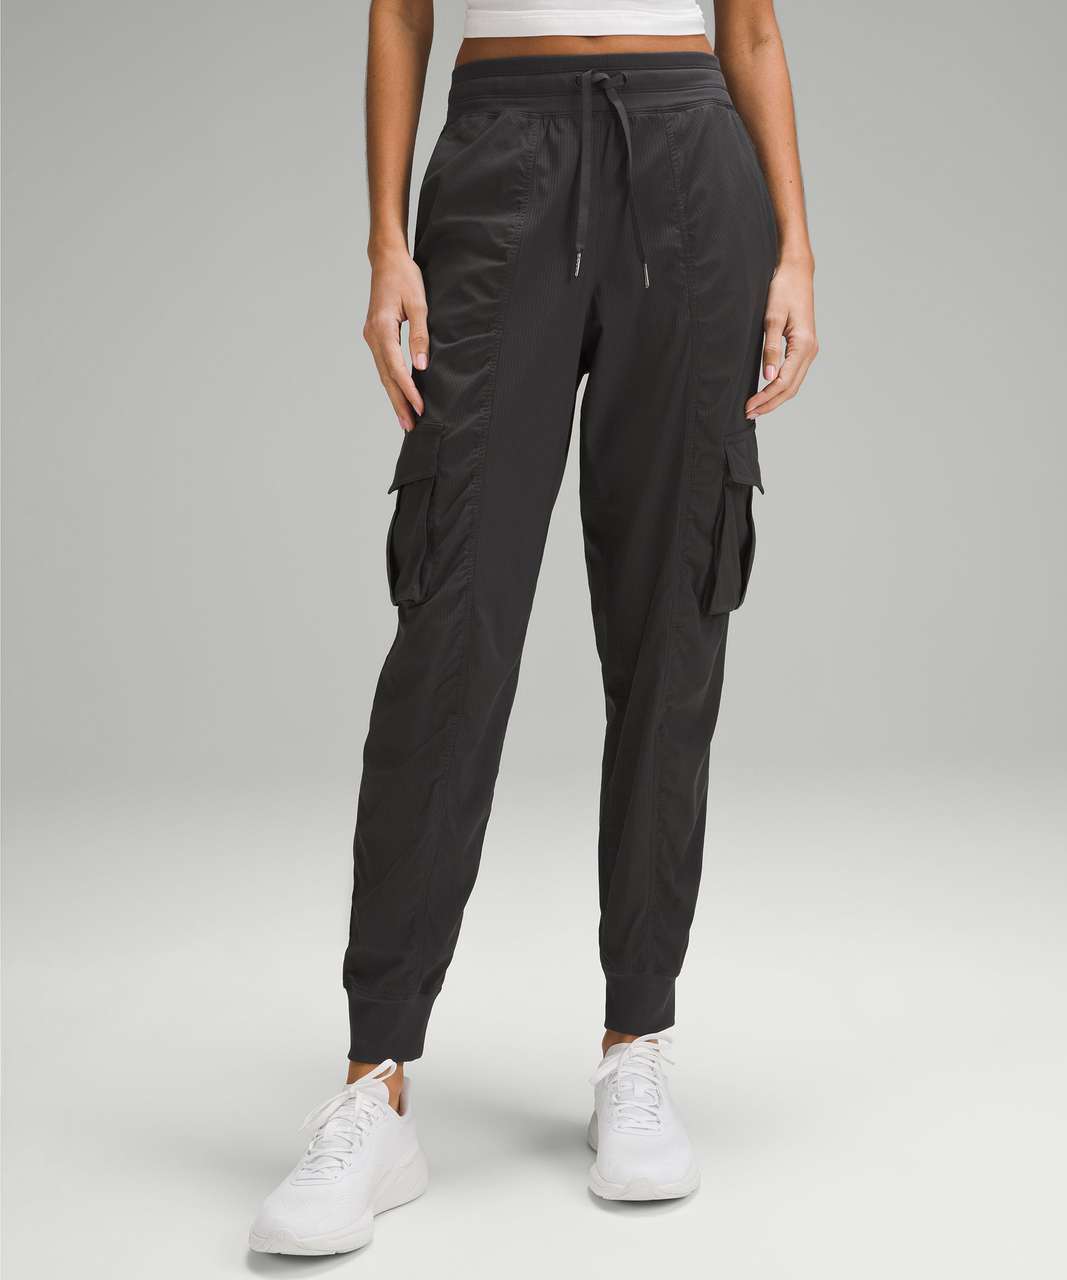 Lululemon Dance Studio Relaxed-Fit Mid-Rise Cargo Jogger - Graphite Grey